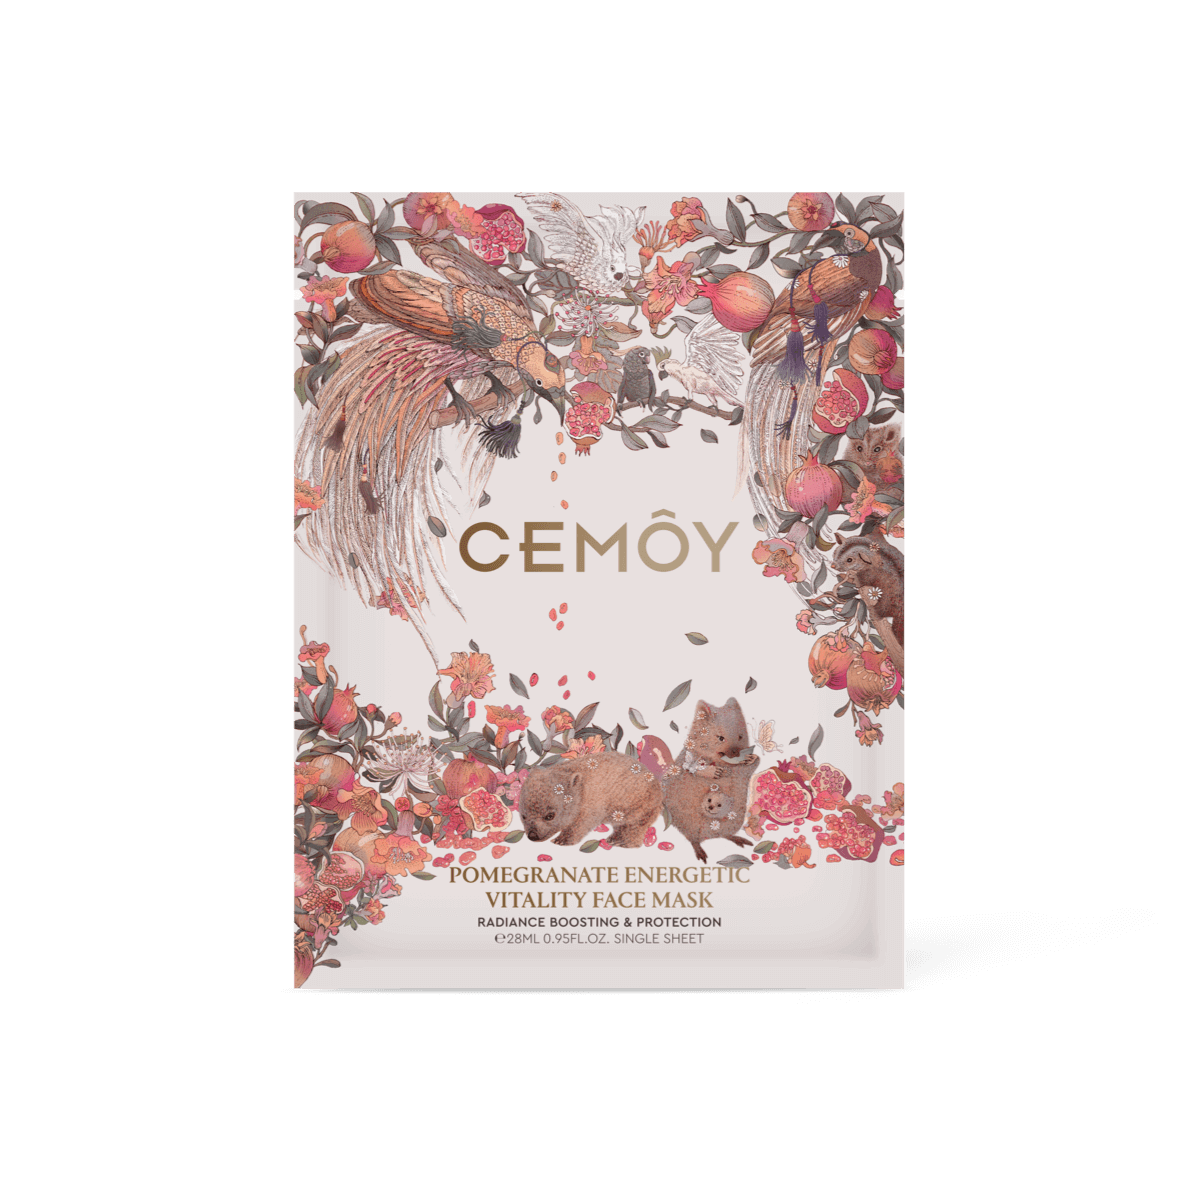 //cemoy.com/uploads/2022/10/CEMOY_PRODUCT_Pomegranate-Energetic-Vitality-Face-Mask.png